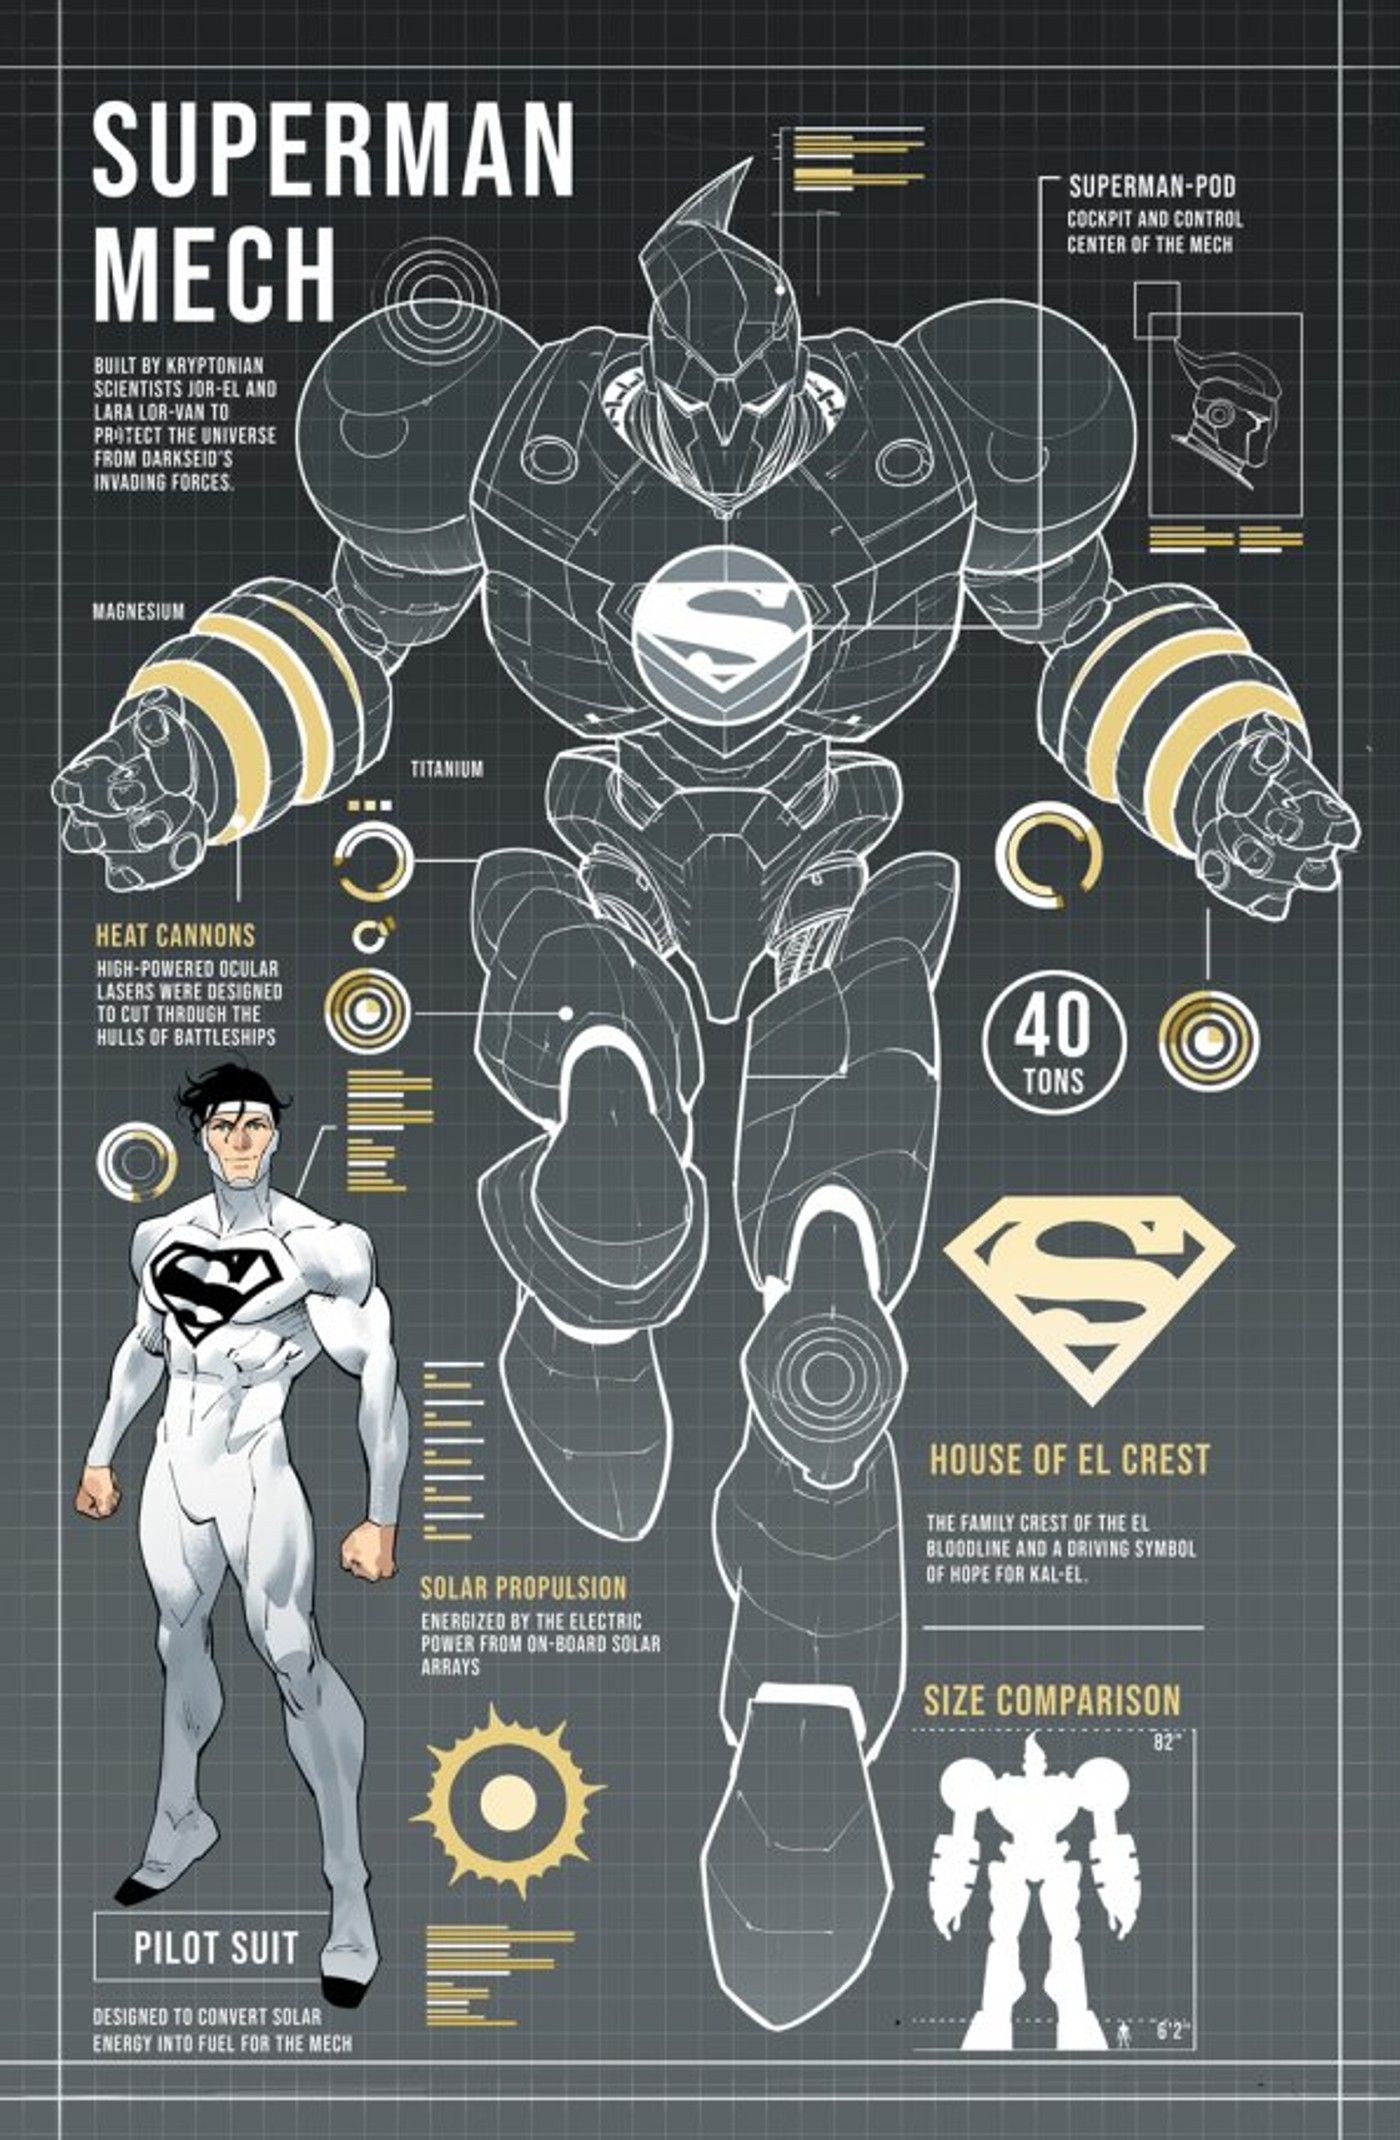 Cover for DC: Mech #2 focused on Superman